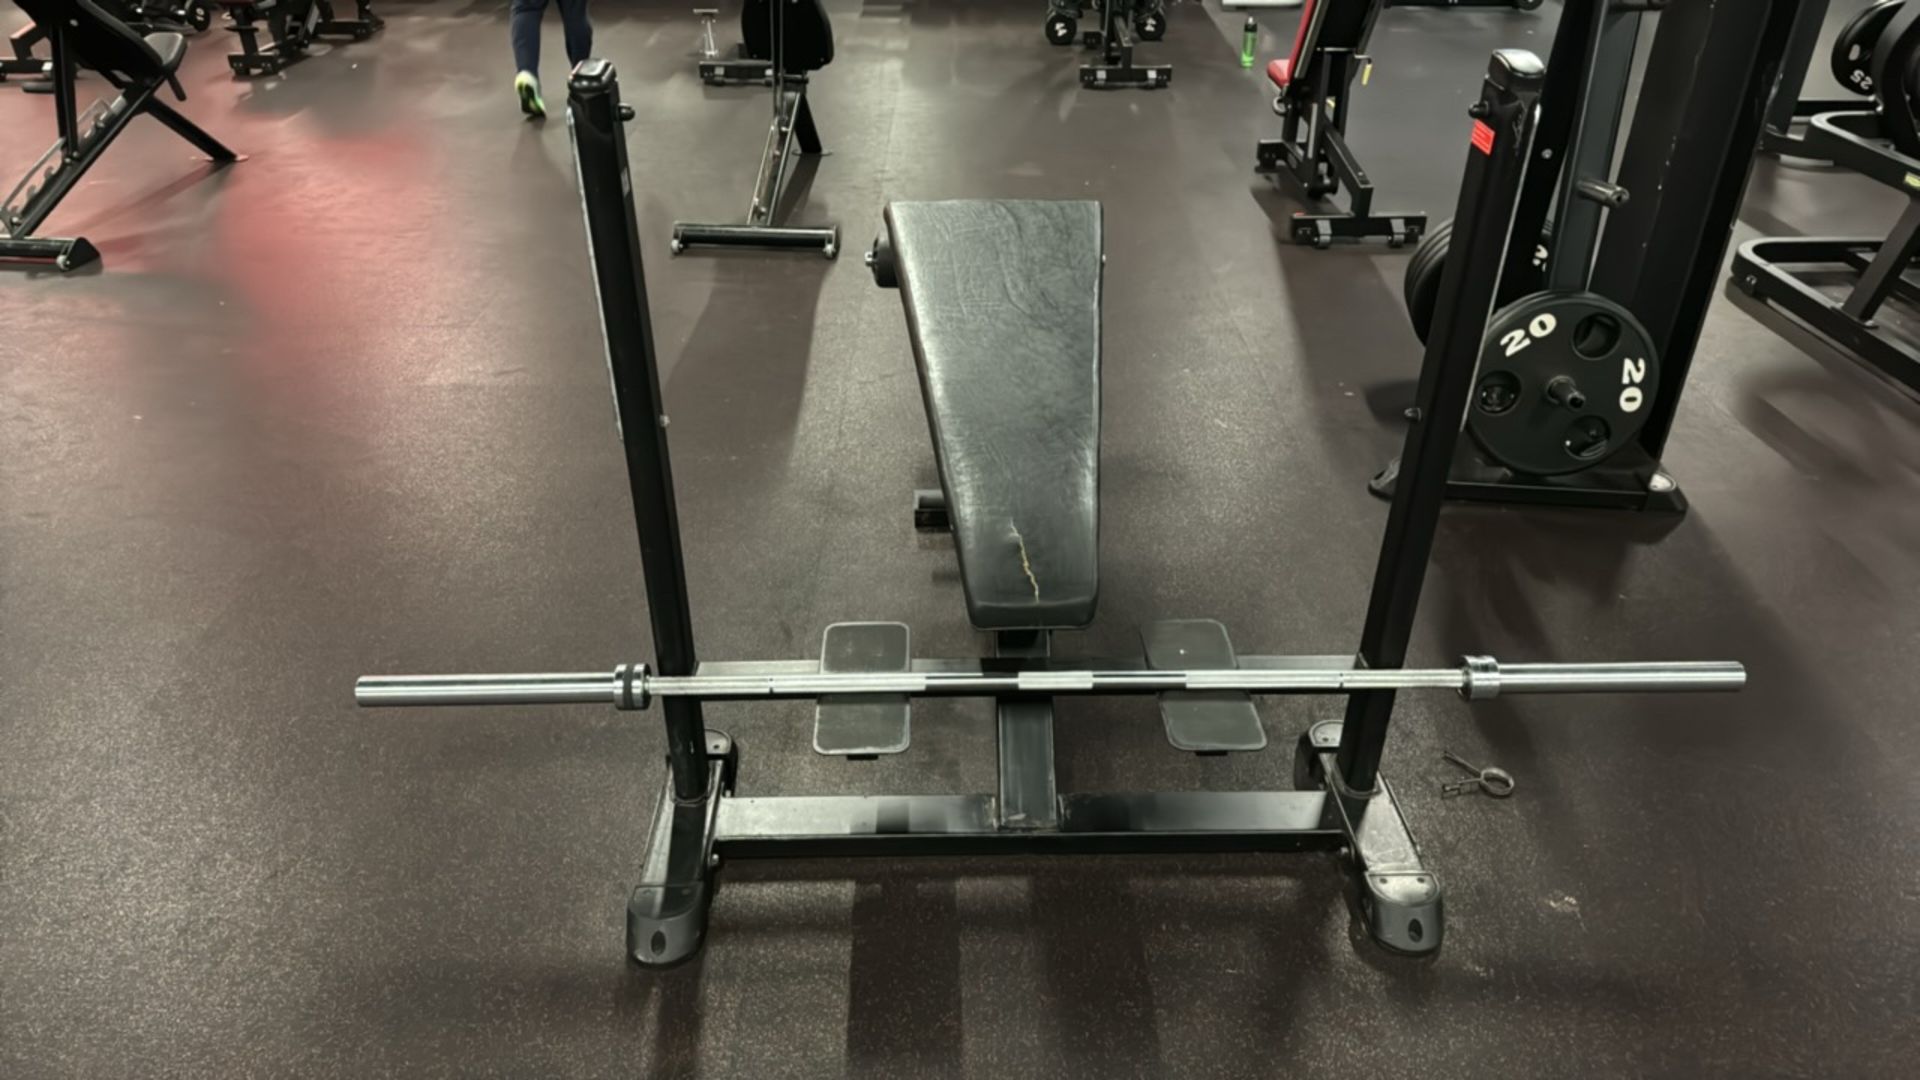 Decline Chest Press Station - Image 2 of 4